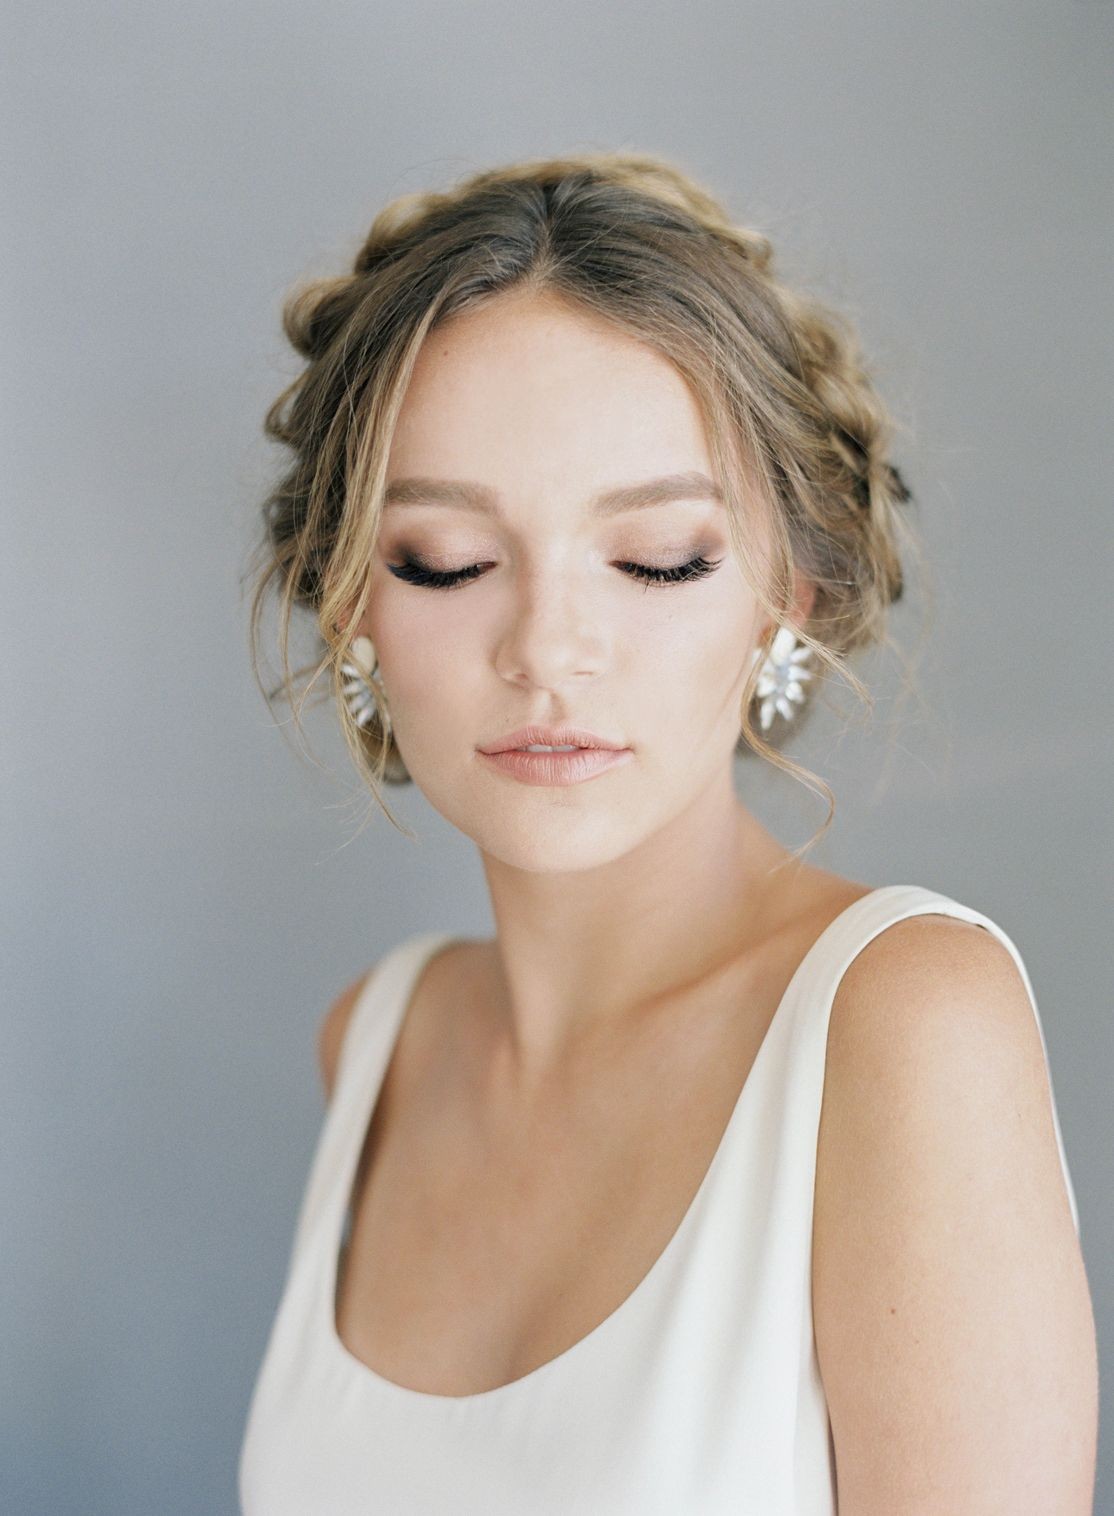 5 Top Wedding Hairstyles for Short Hair that Looks Perfect for Everyone 8f10c2642b593f7083aa4f5de7a1da2f